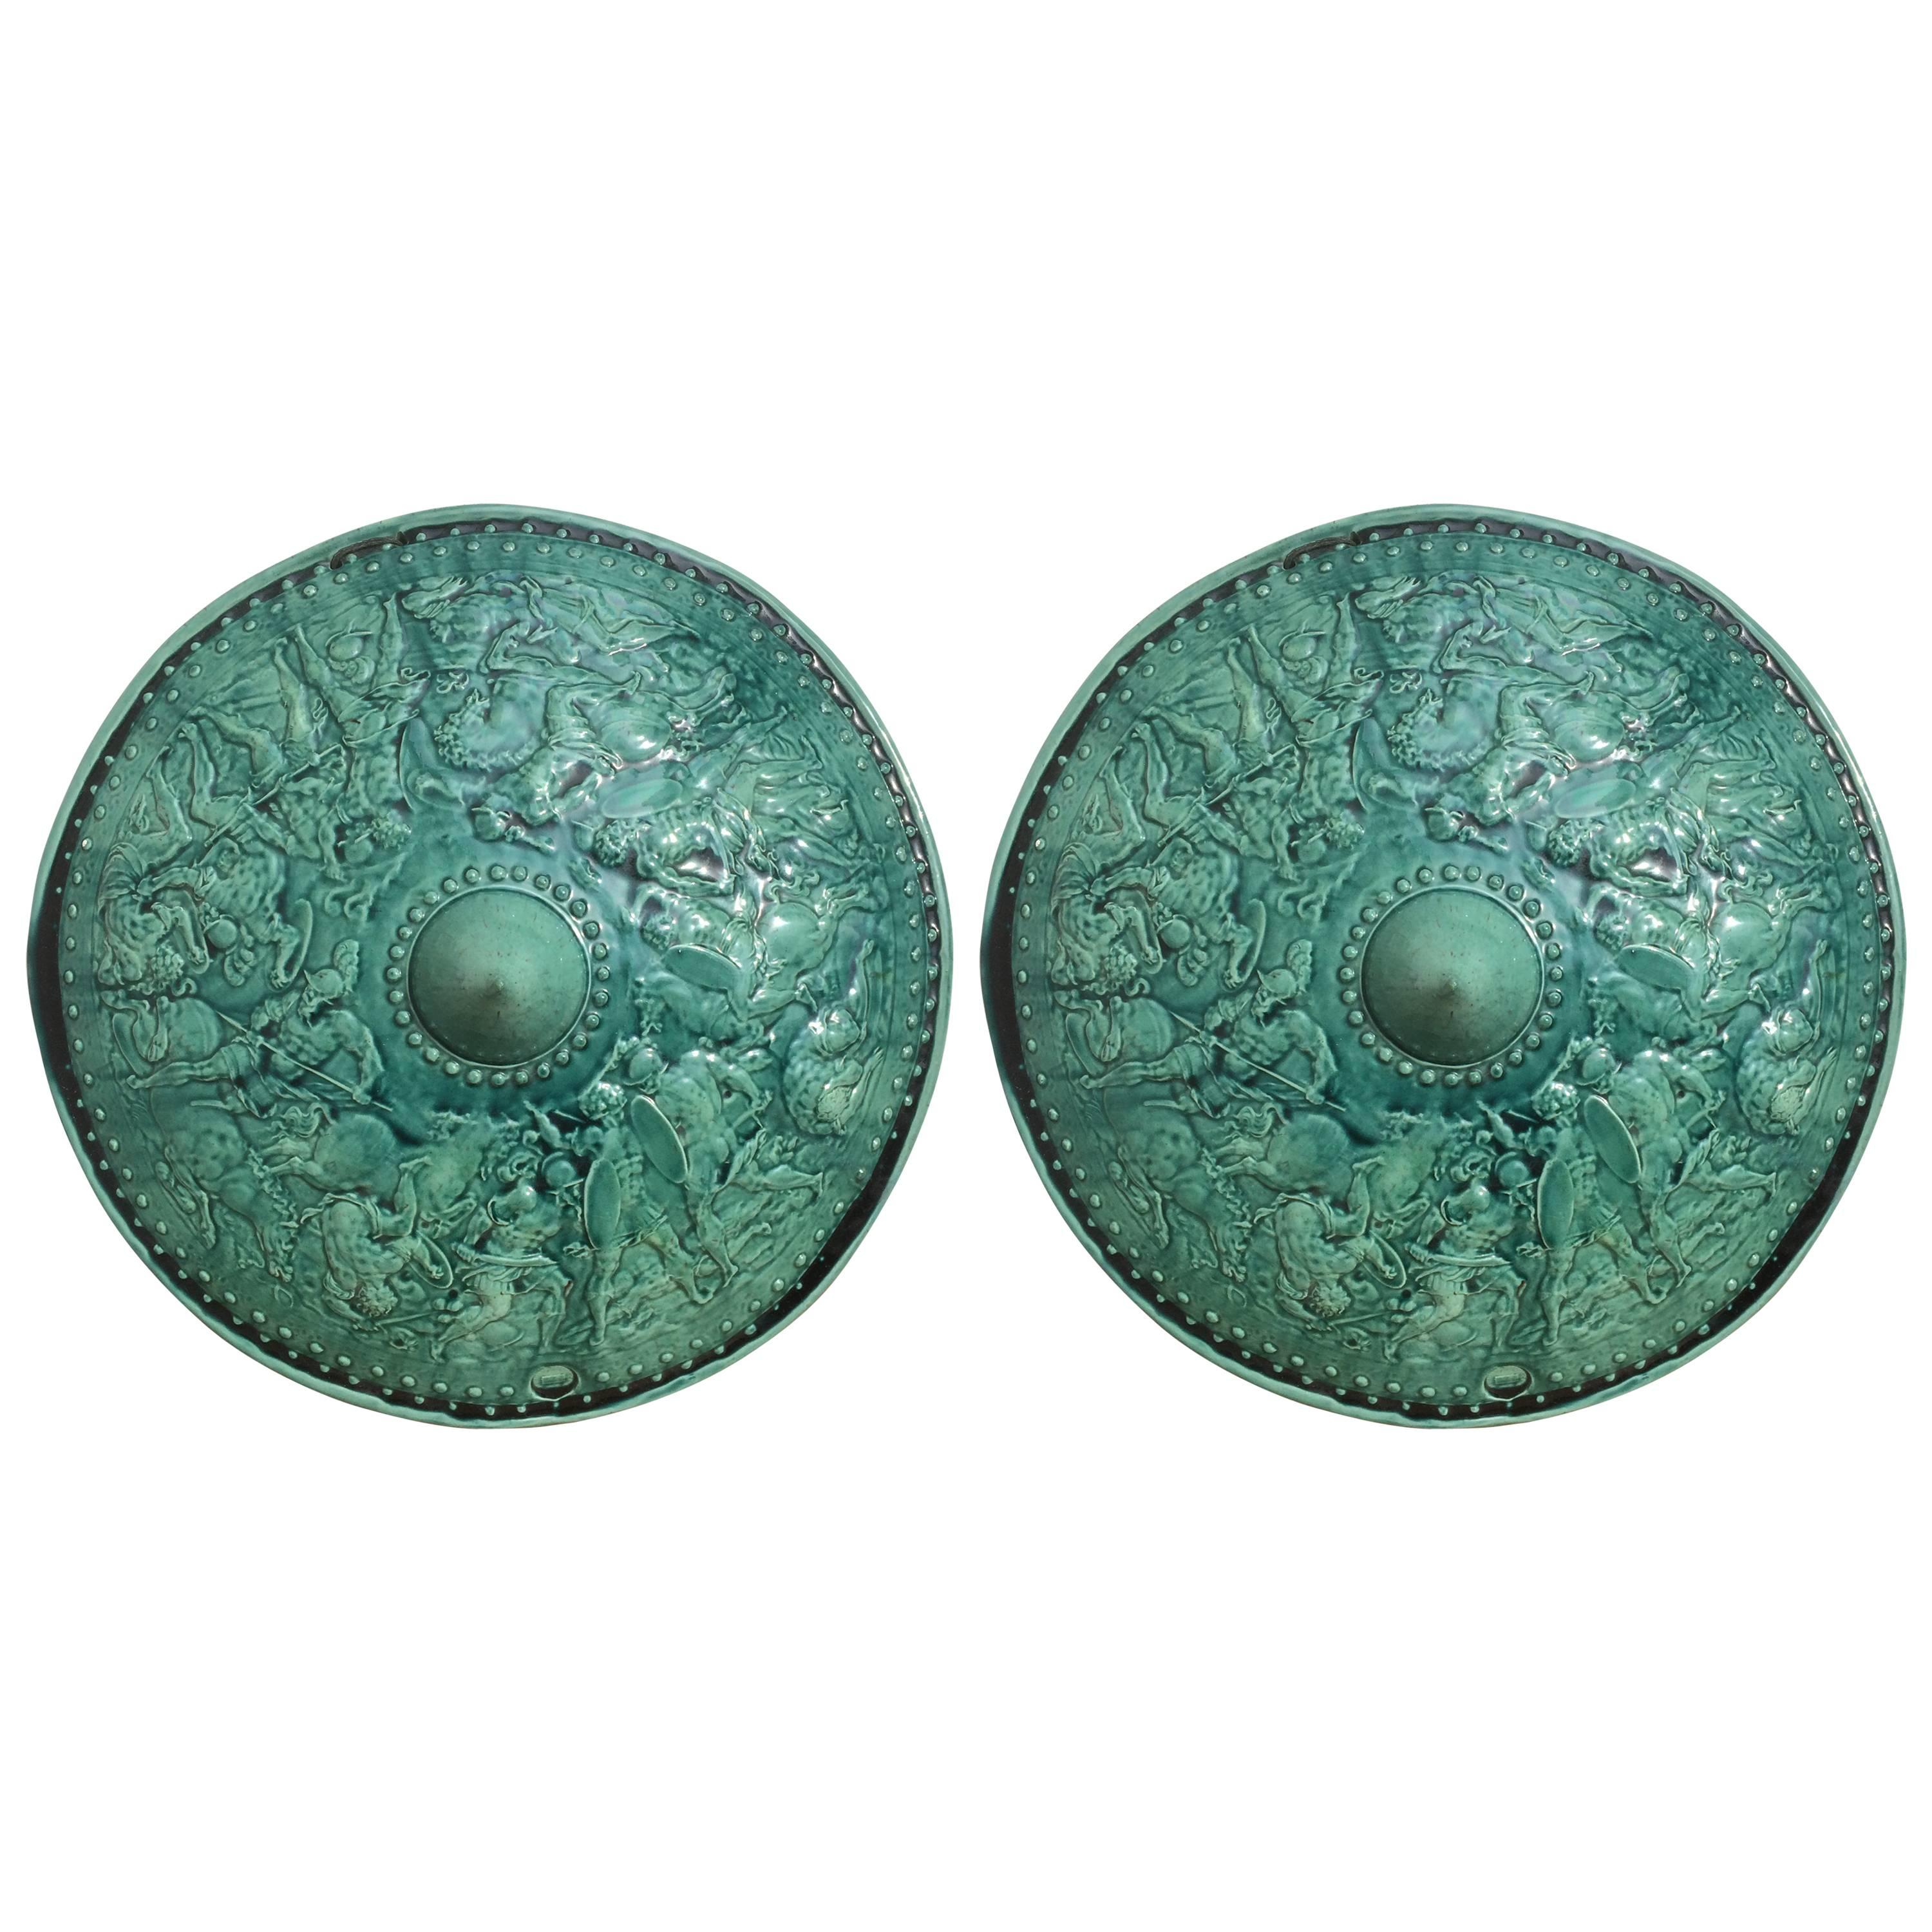 Pair of Turquoise Majolica Parade Shields with Battle Scenes, 19th Century